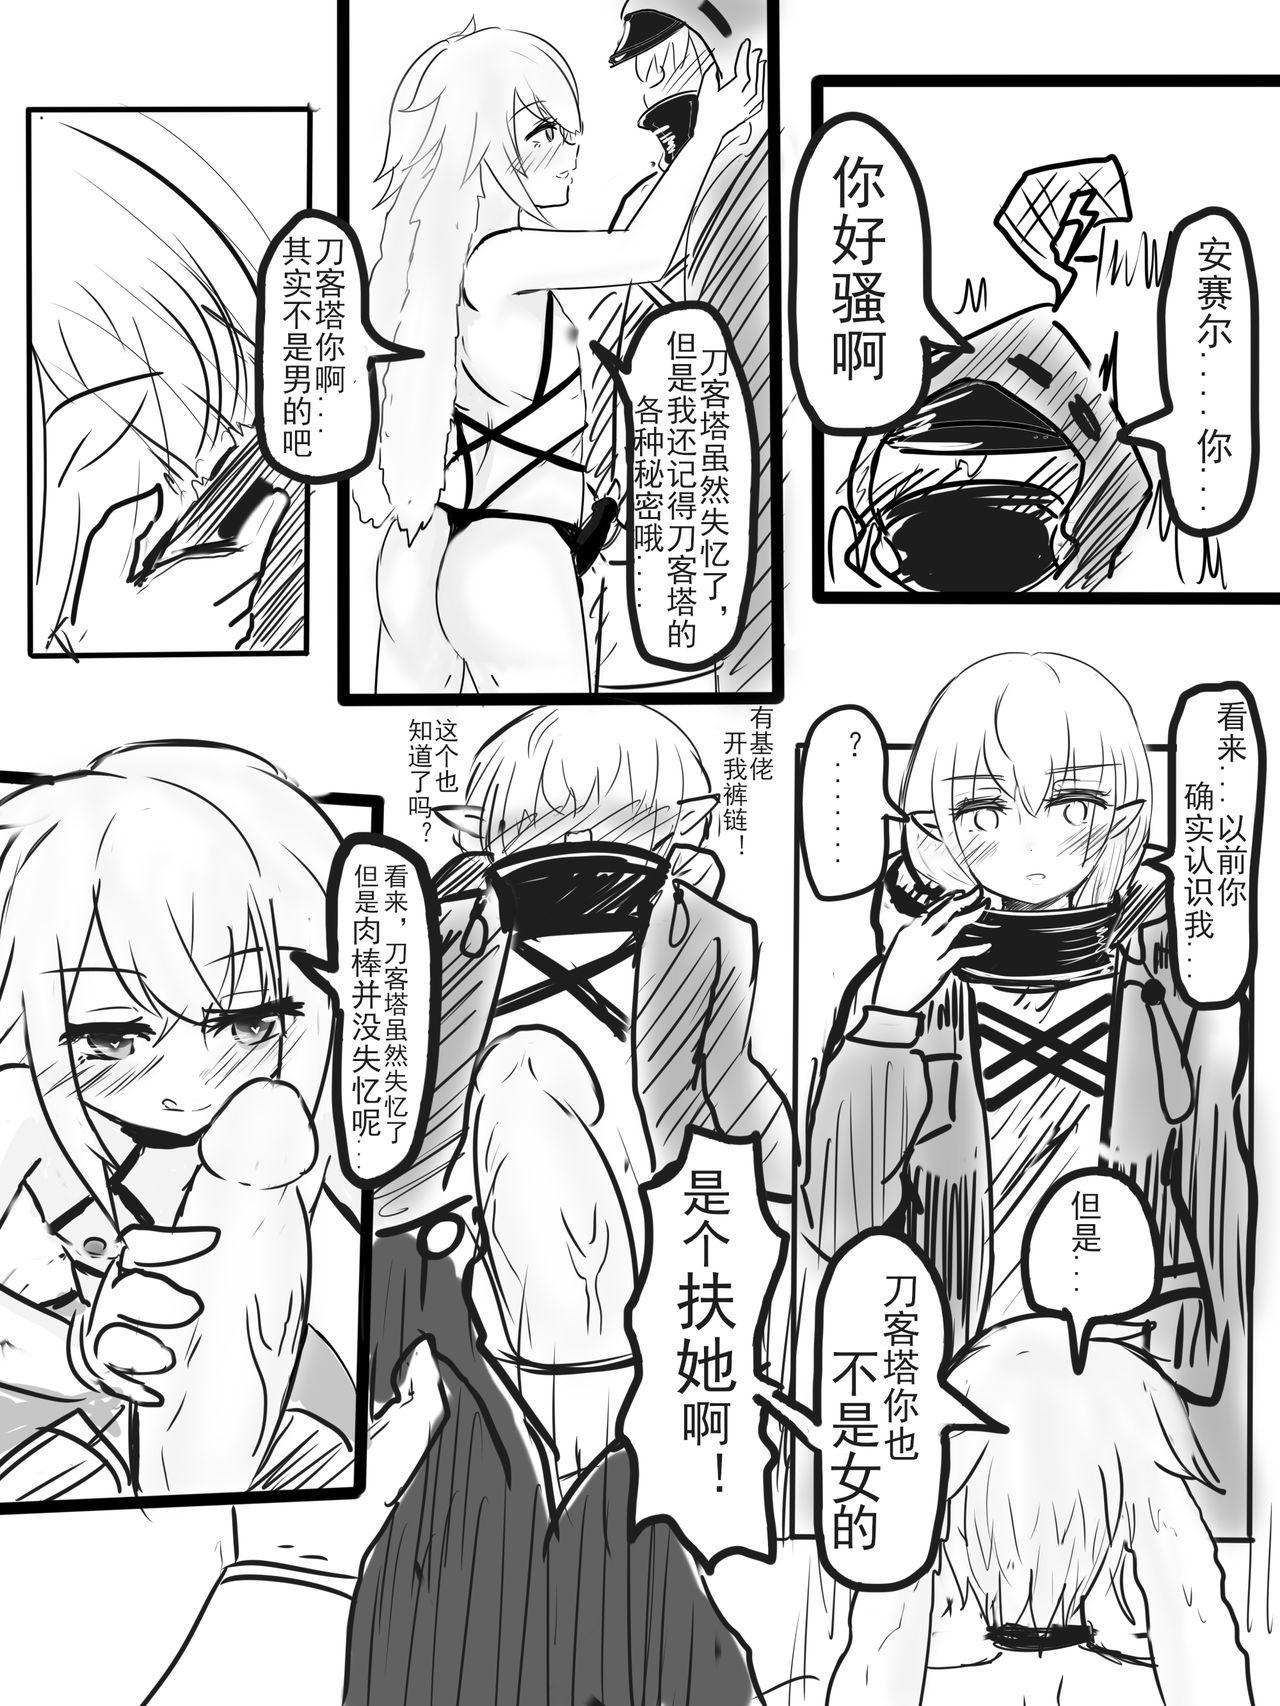 Wet Pussy 安赛尔的特别服务1 - Arknights Man - Page 5